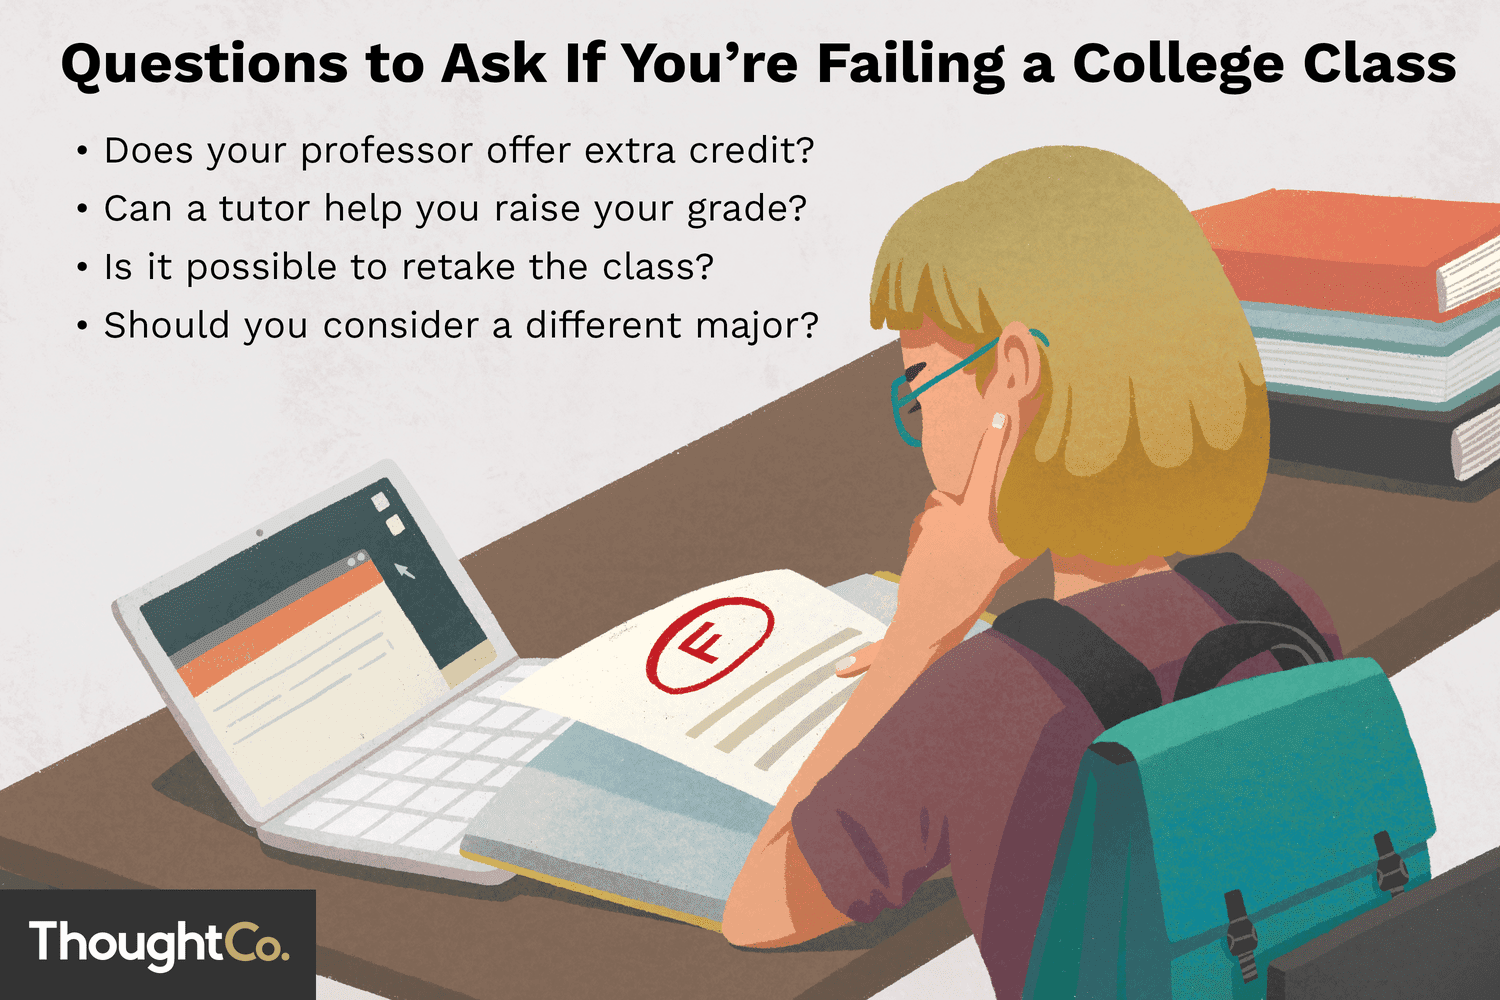 Questions to ask if you fail a class in college